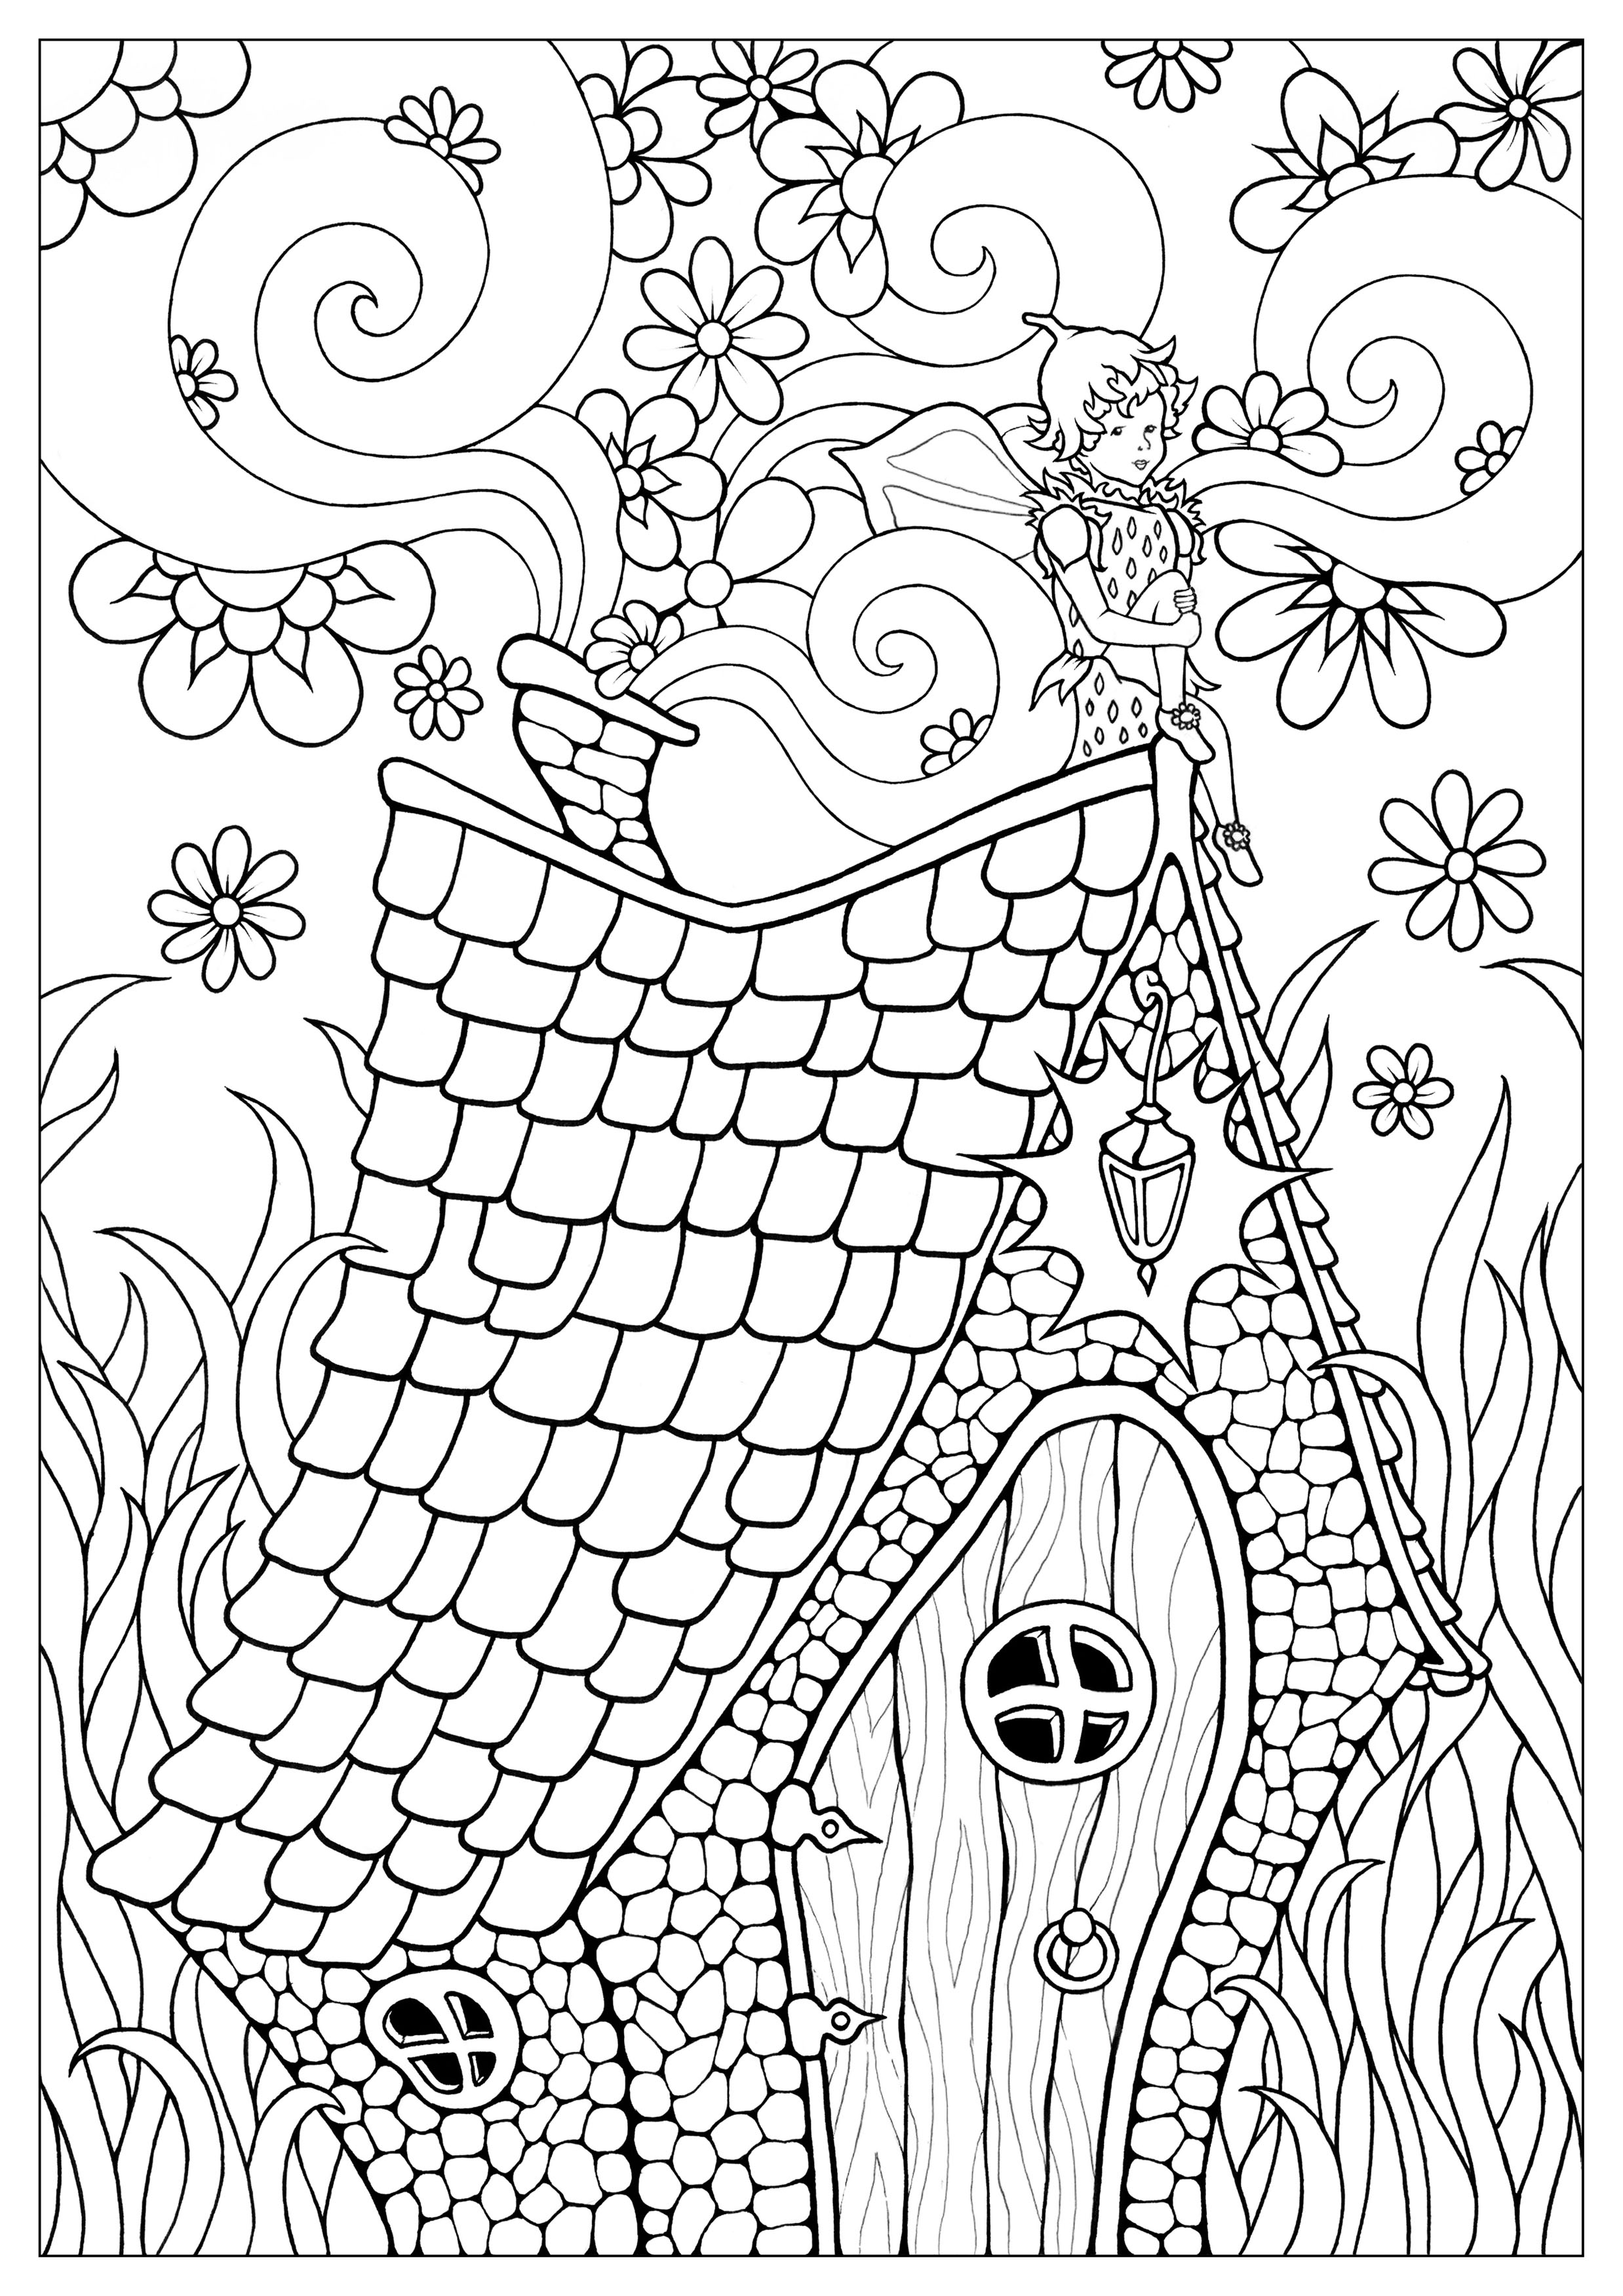 House - Coloring Pages for Adults